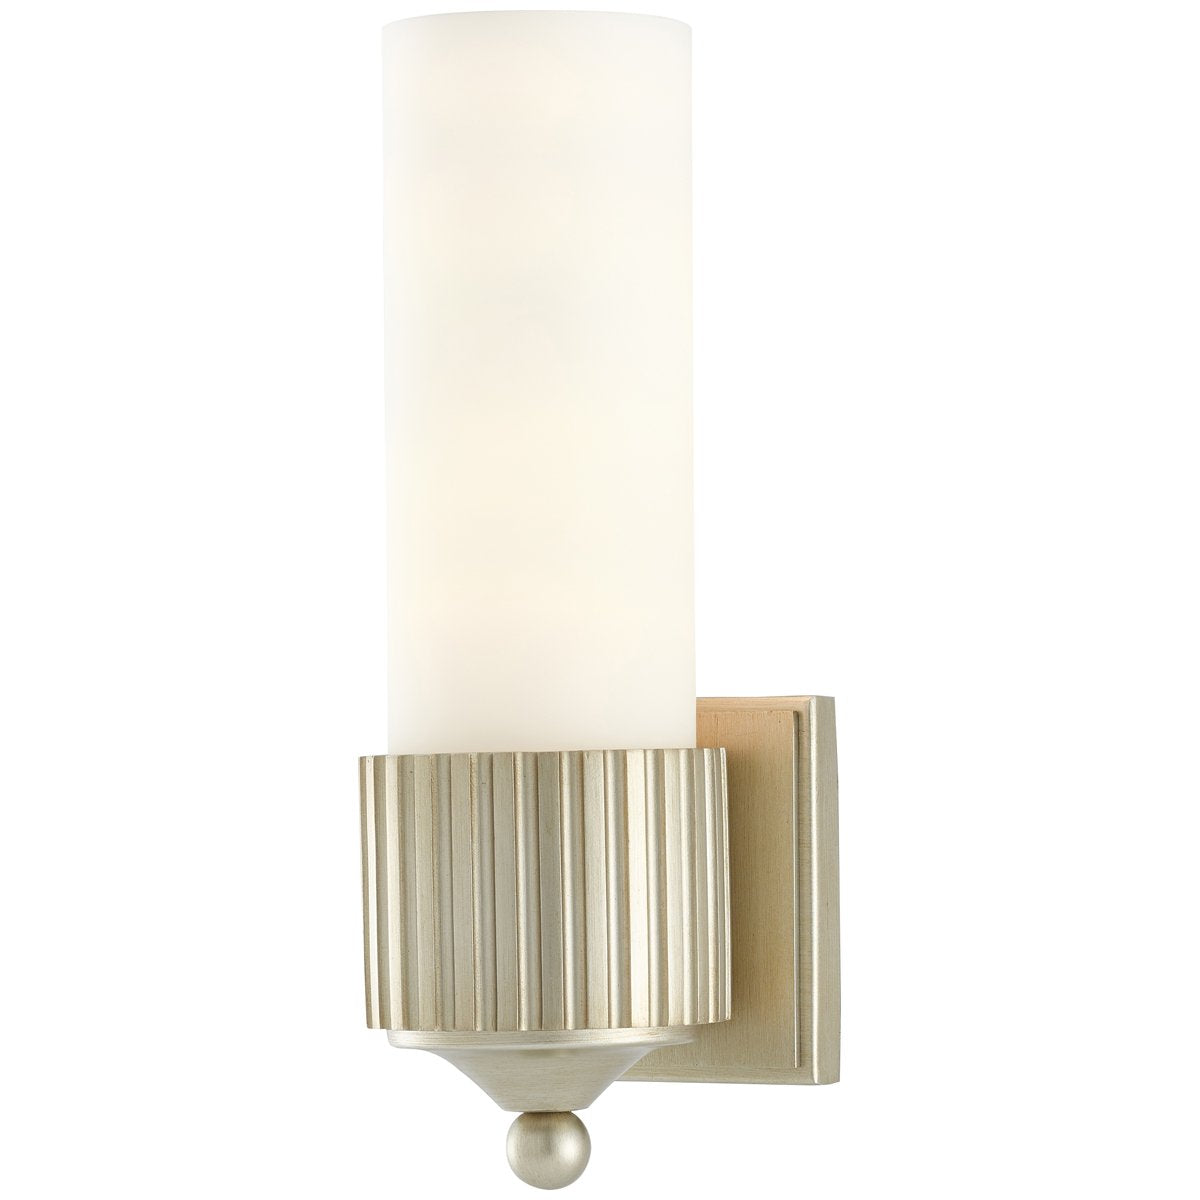 Currey and Company Bryce Wall Sconce